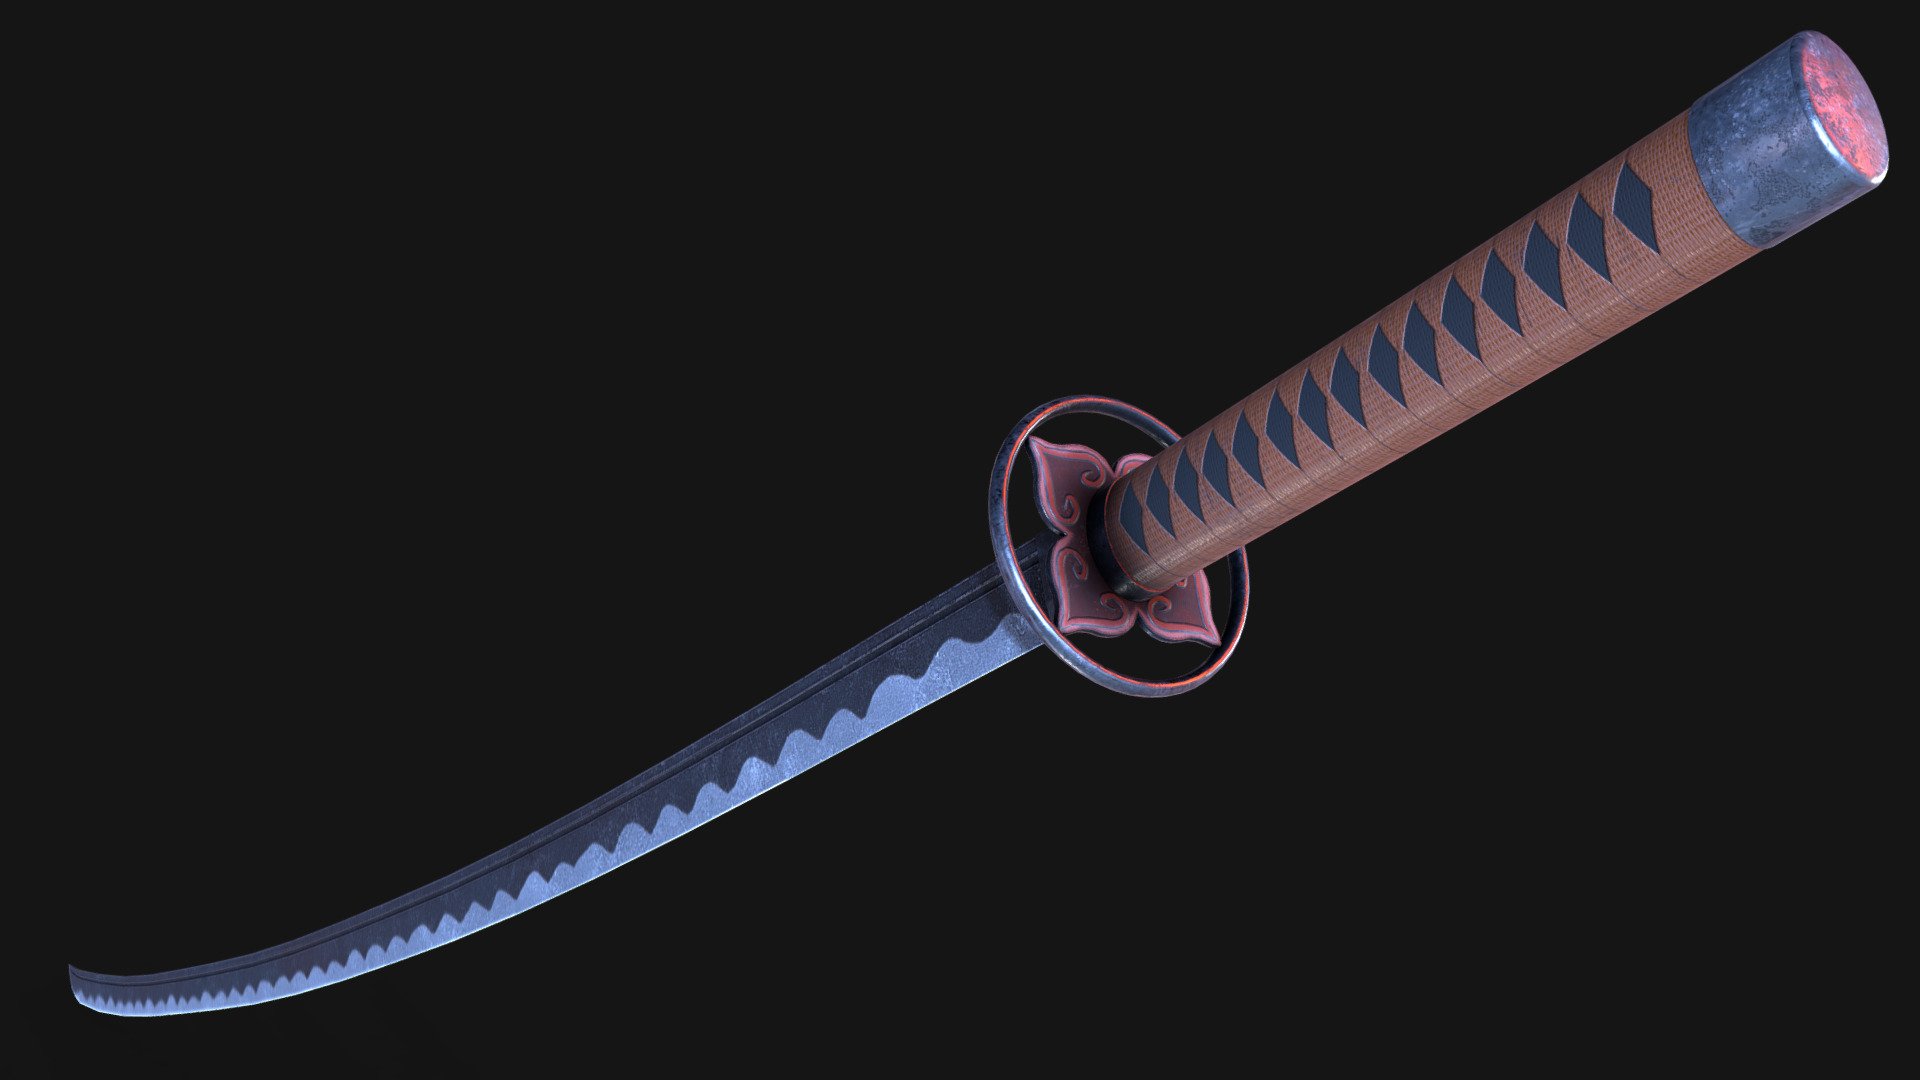 Made in blender for a Blade and Sorcery mod. Textured in Substance Painter.

Part of my Dark Souls weapon pack mod: https://www.nexusmods.com/bladeandsorcery/mods/2309 - Nodachi "Washing Pole" - Buy Royalty Free 3D model by Roderick (@Roderick3D) 3d model